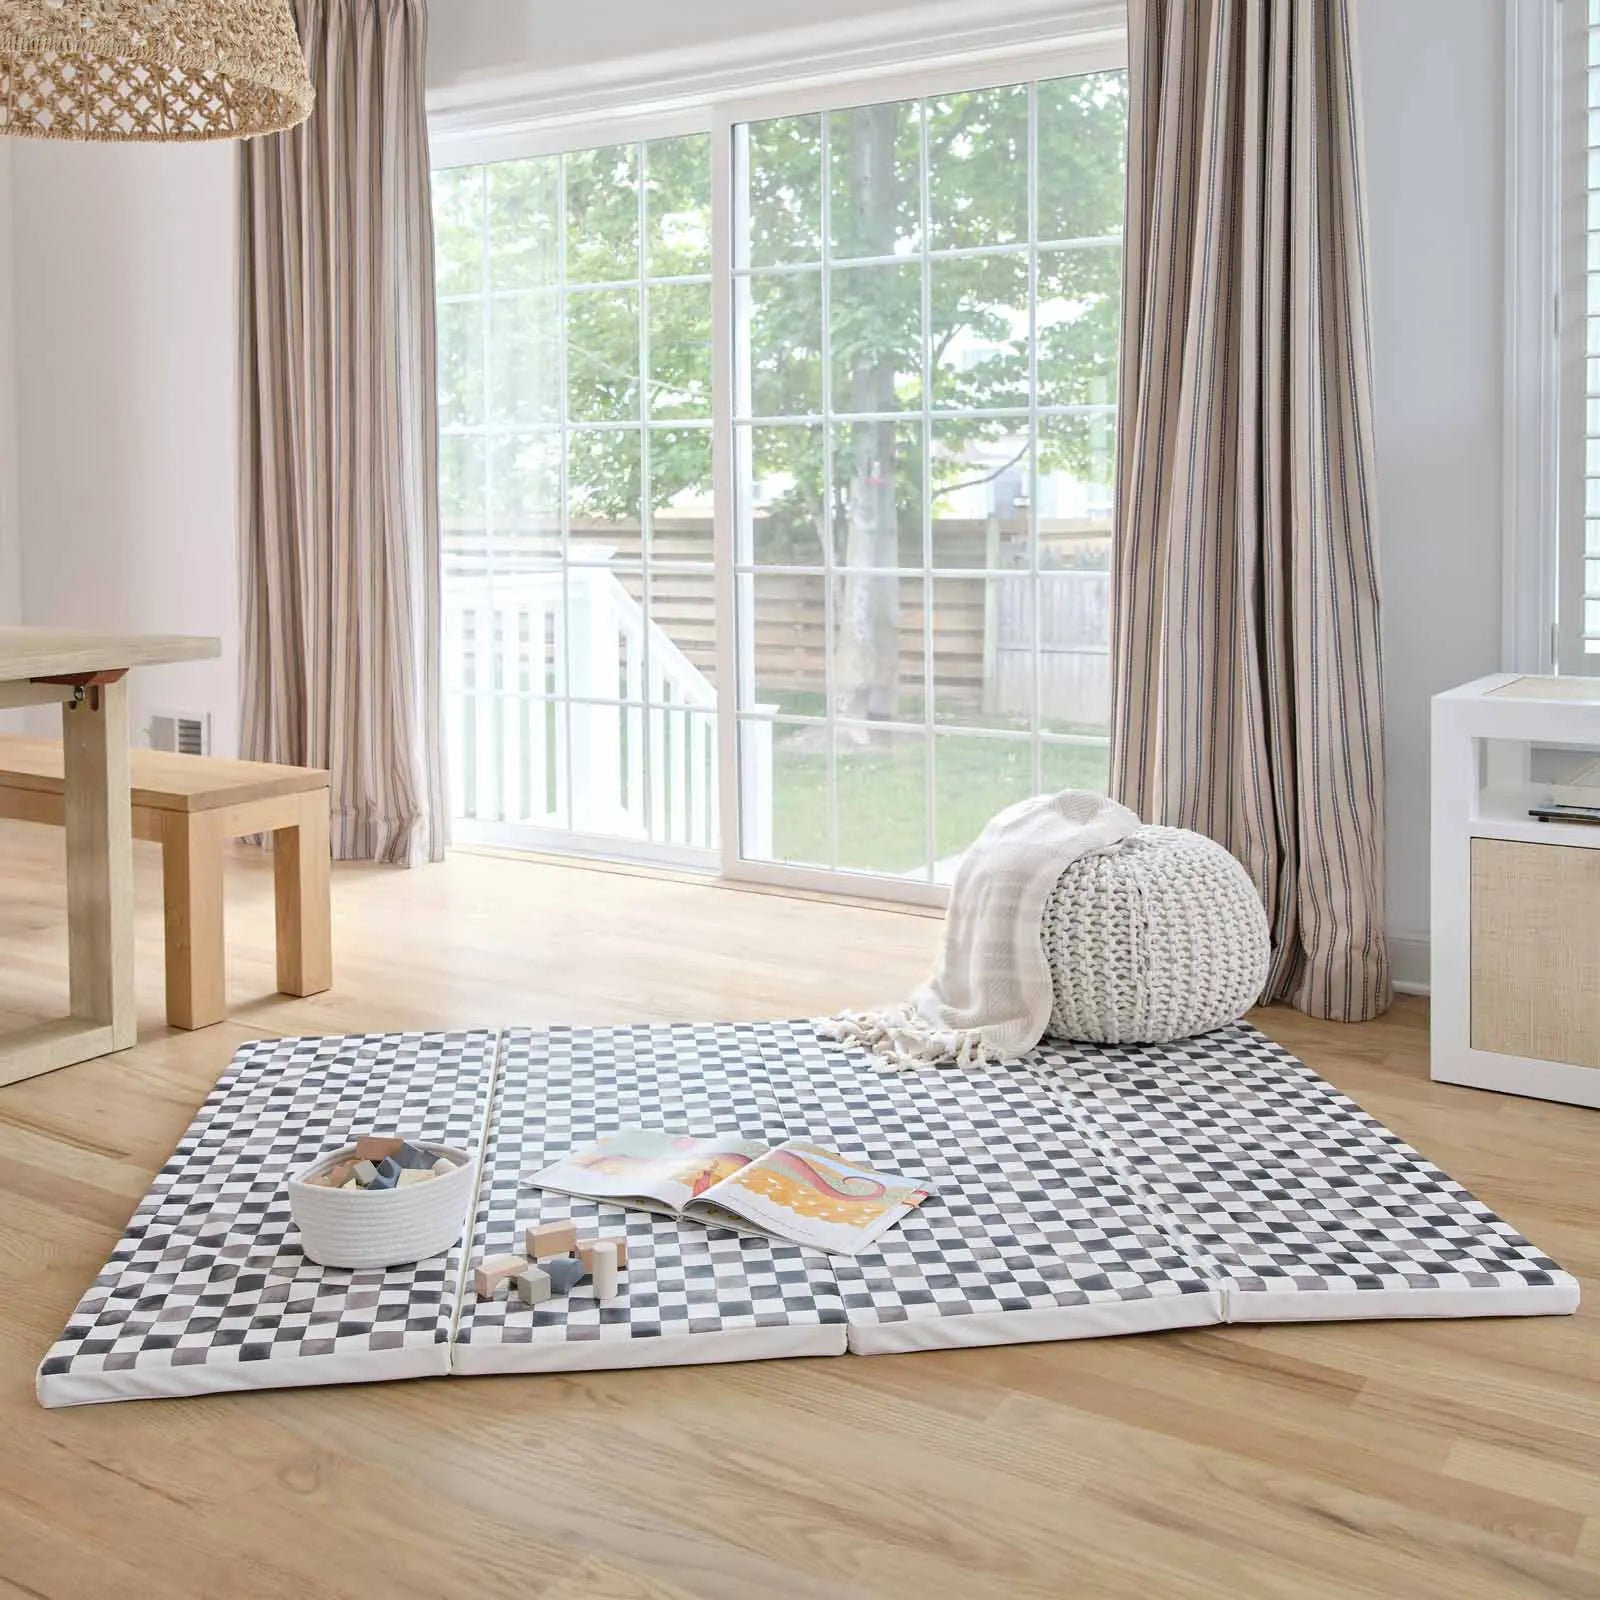 Tuxedo black and white checker print tumbling mat shown in open living space with a pouf, blanket, basket of blocks, and a book on the mat